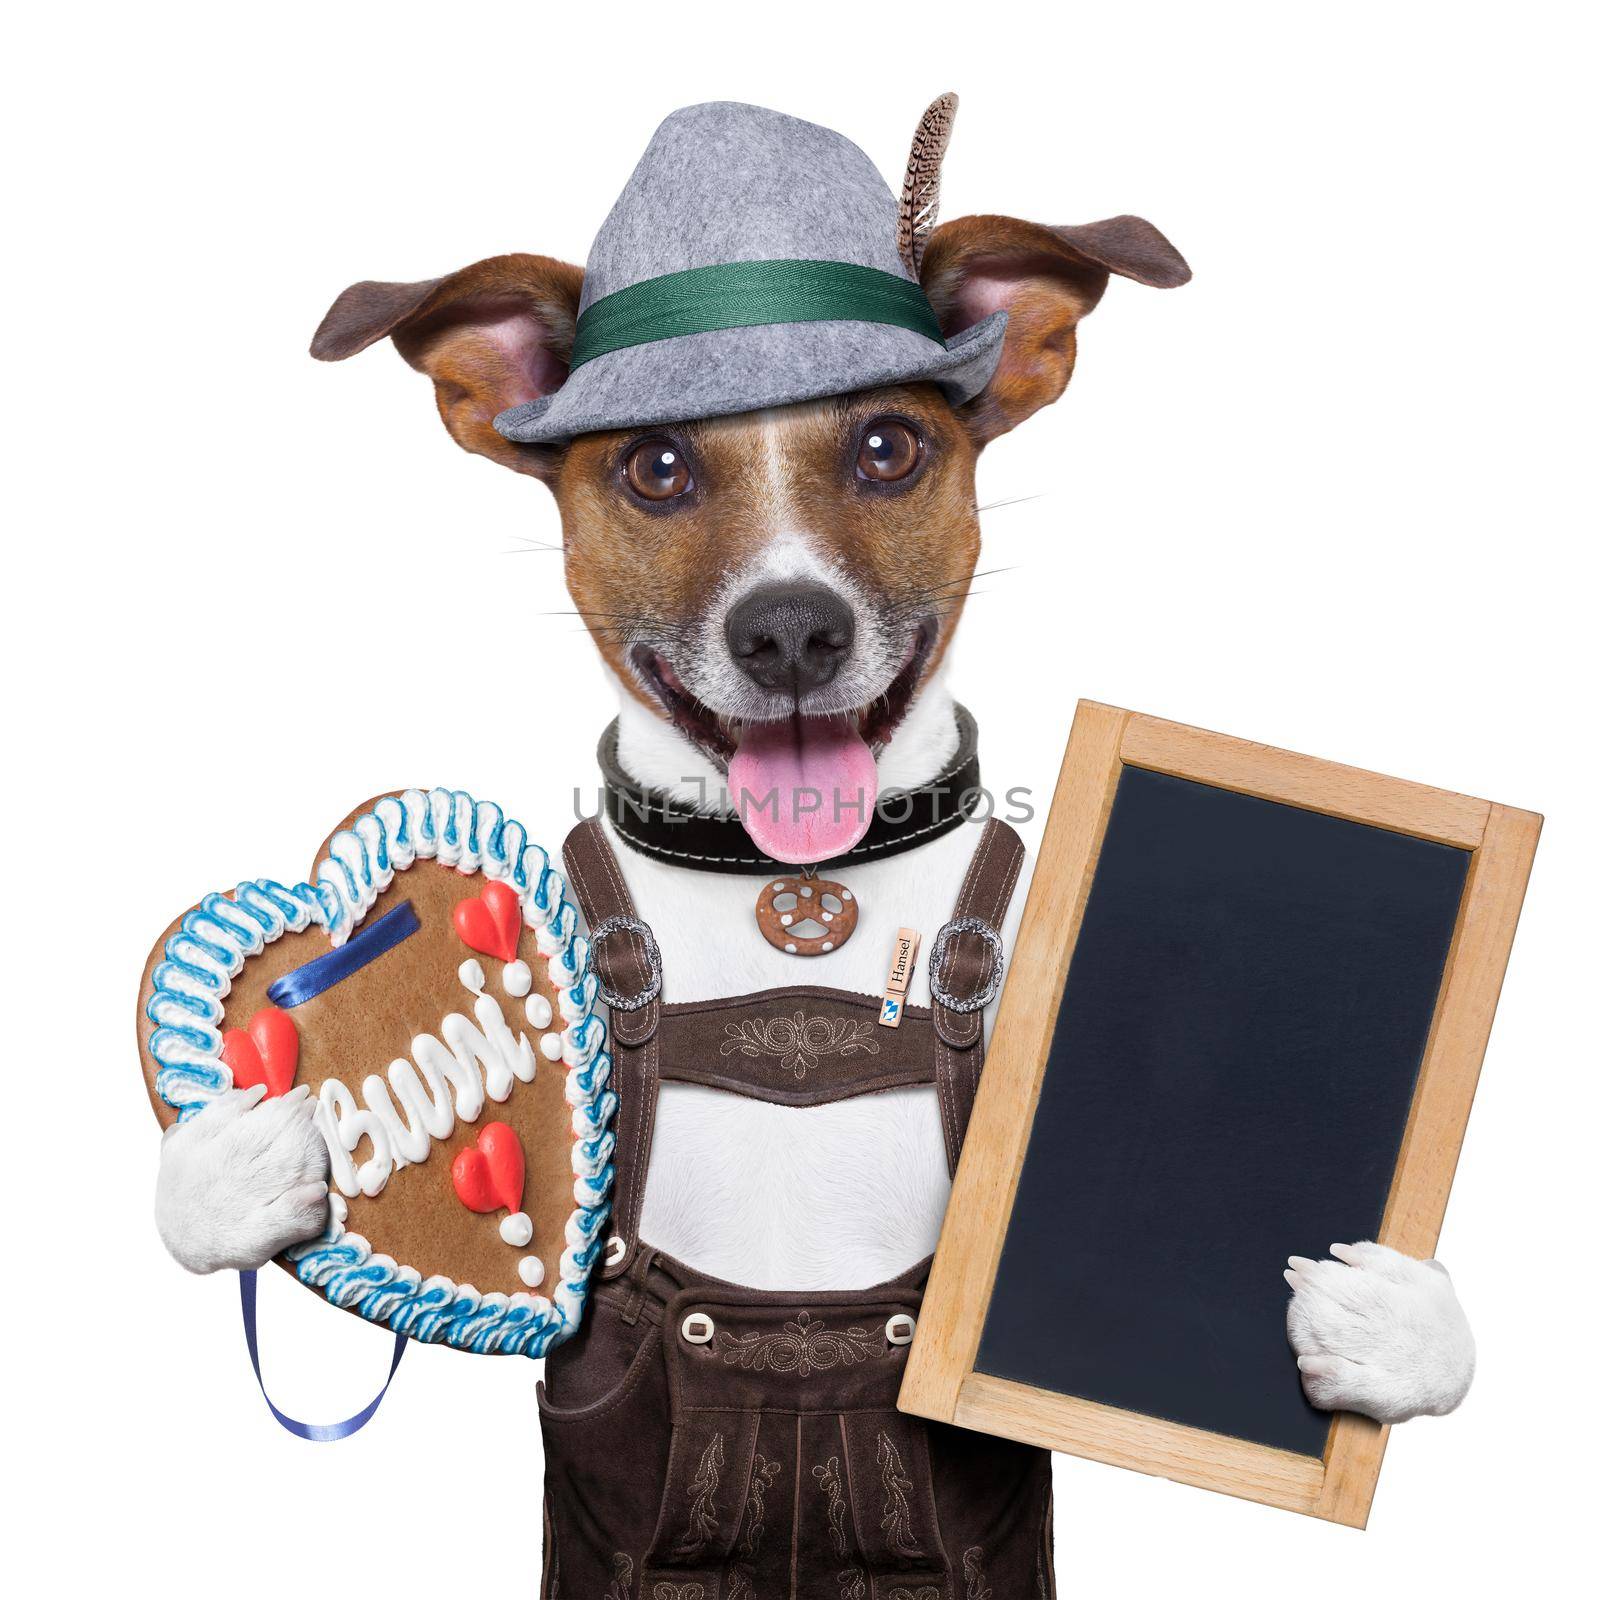 oktoberfest dog with blackboard and gingerbread heart, smiling happy